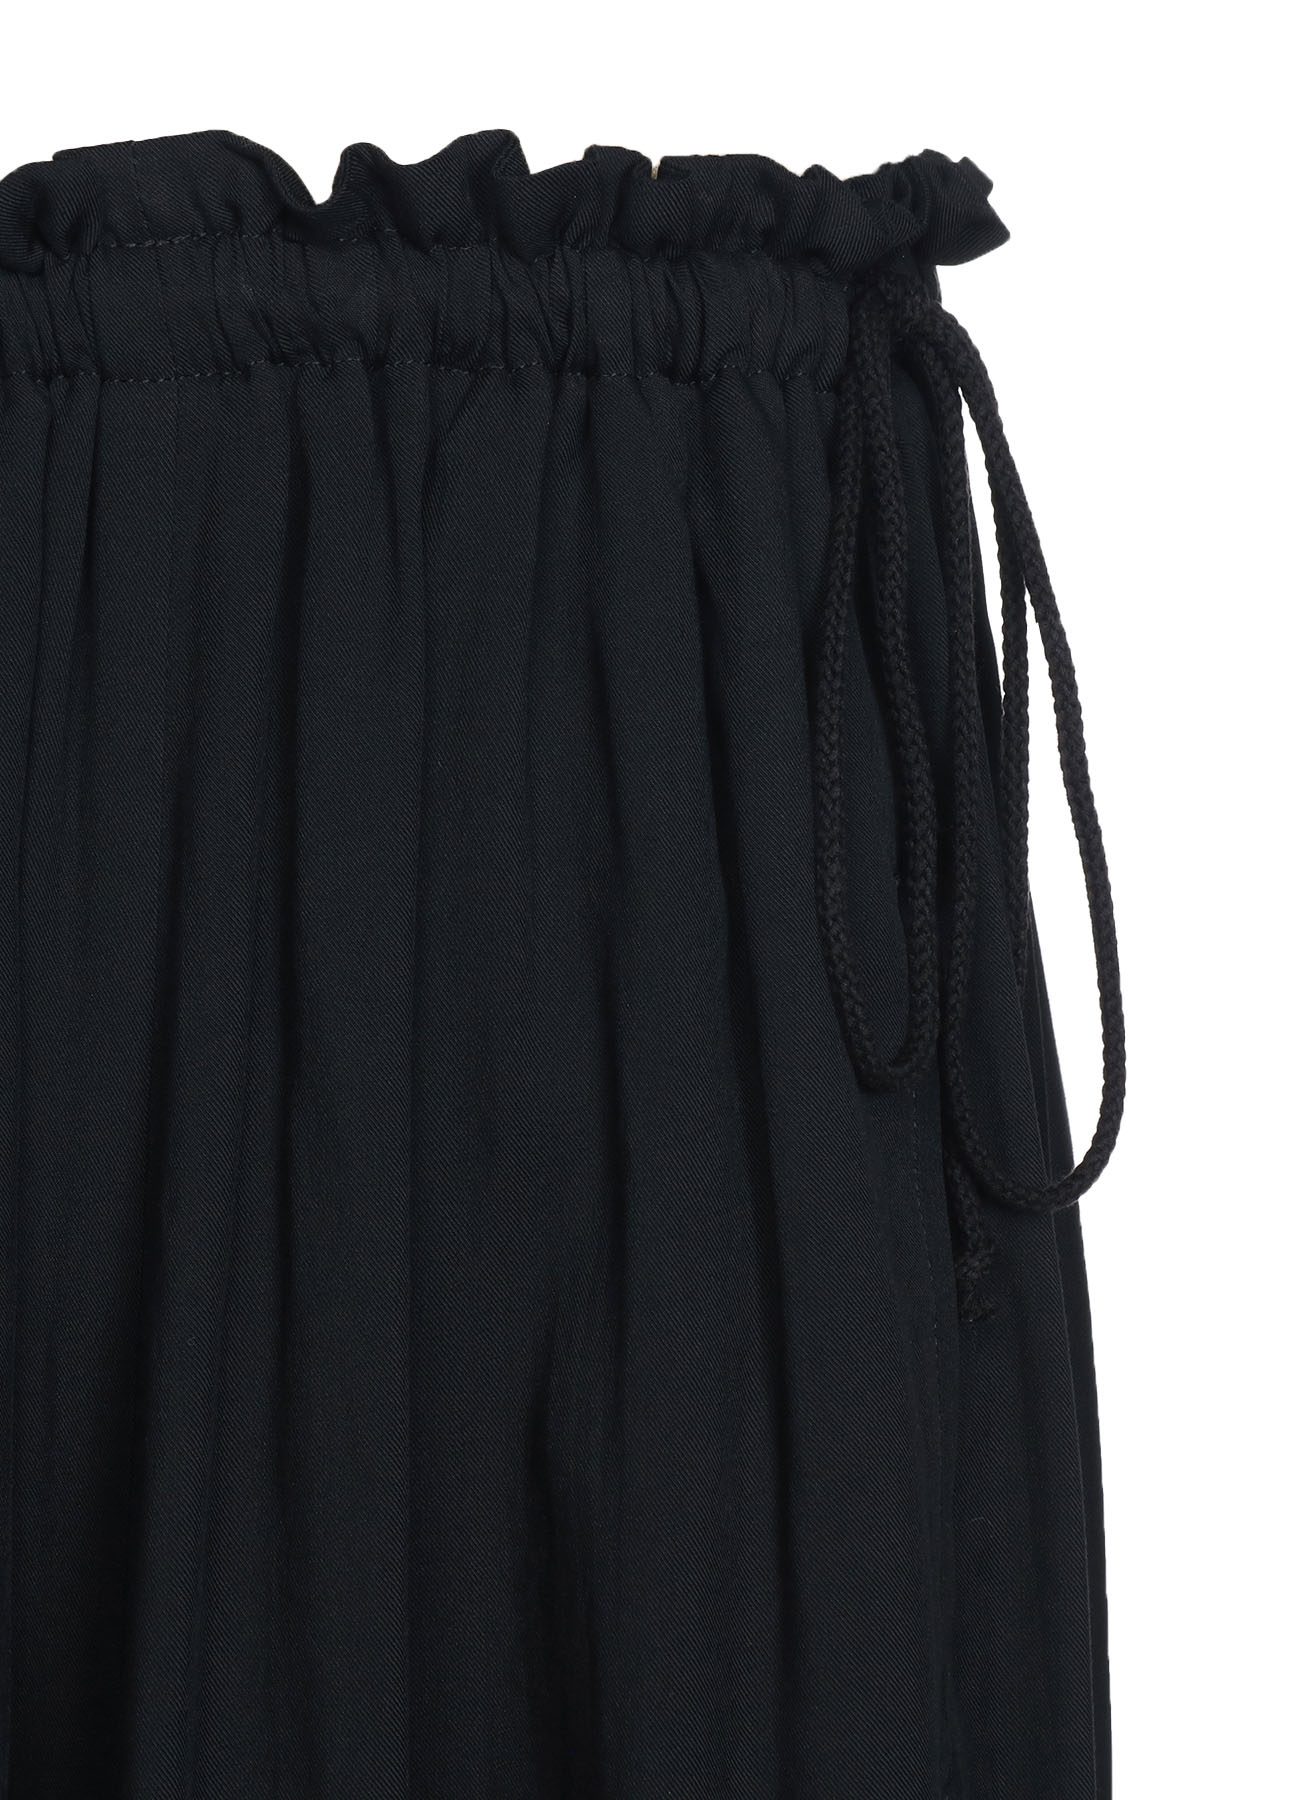 RAYON WASHER TWILL STRINGS GATHERED SKIRT